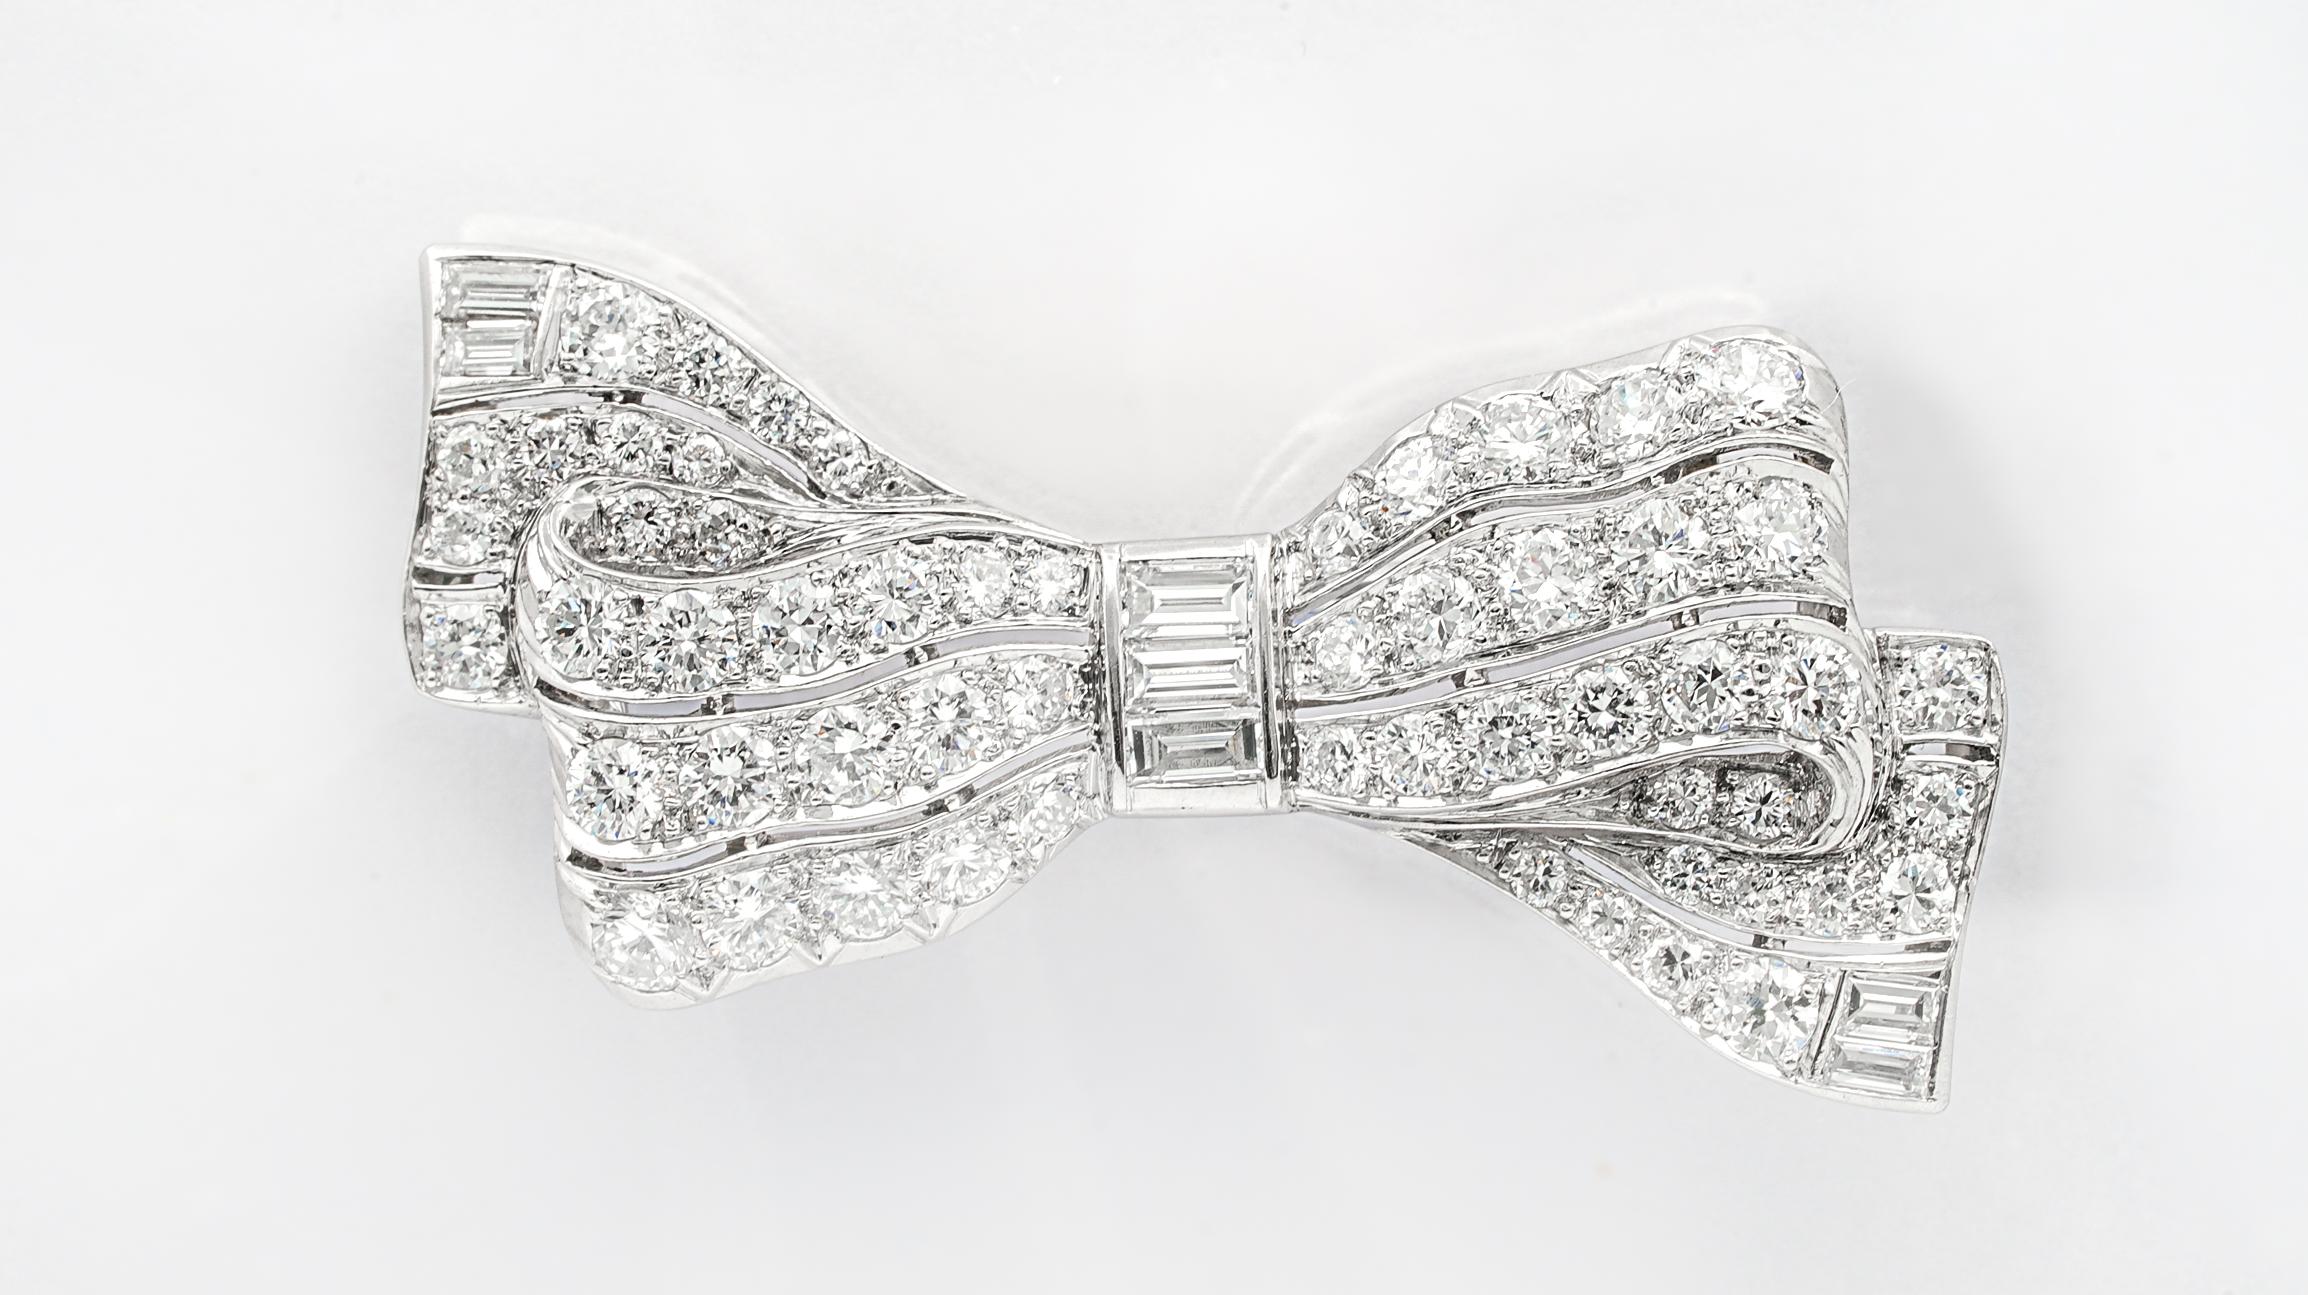 Art Deco Diamond Bow pin from the 1930's finely crafted in platinum with 56 bead set round brilliant cut diamonds and 7 straight baguette diamonds approximately 2.60 carats total weight ranging from H-I color , Fine VS clarity.
Very detailed, well